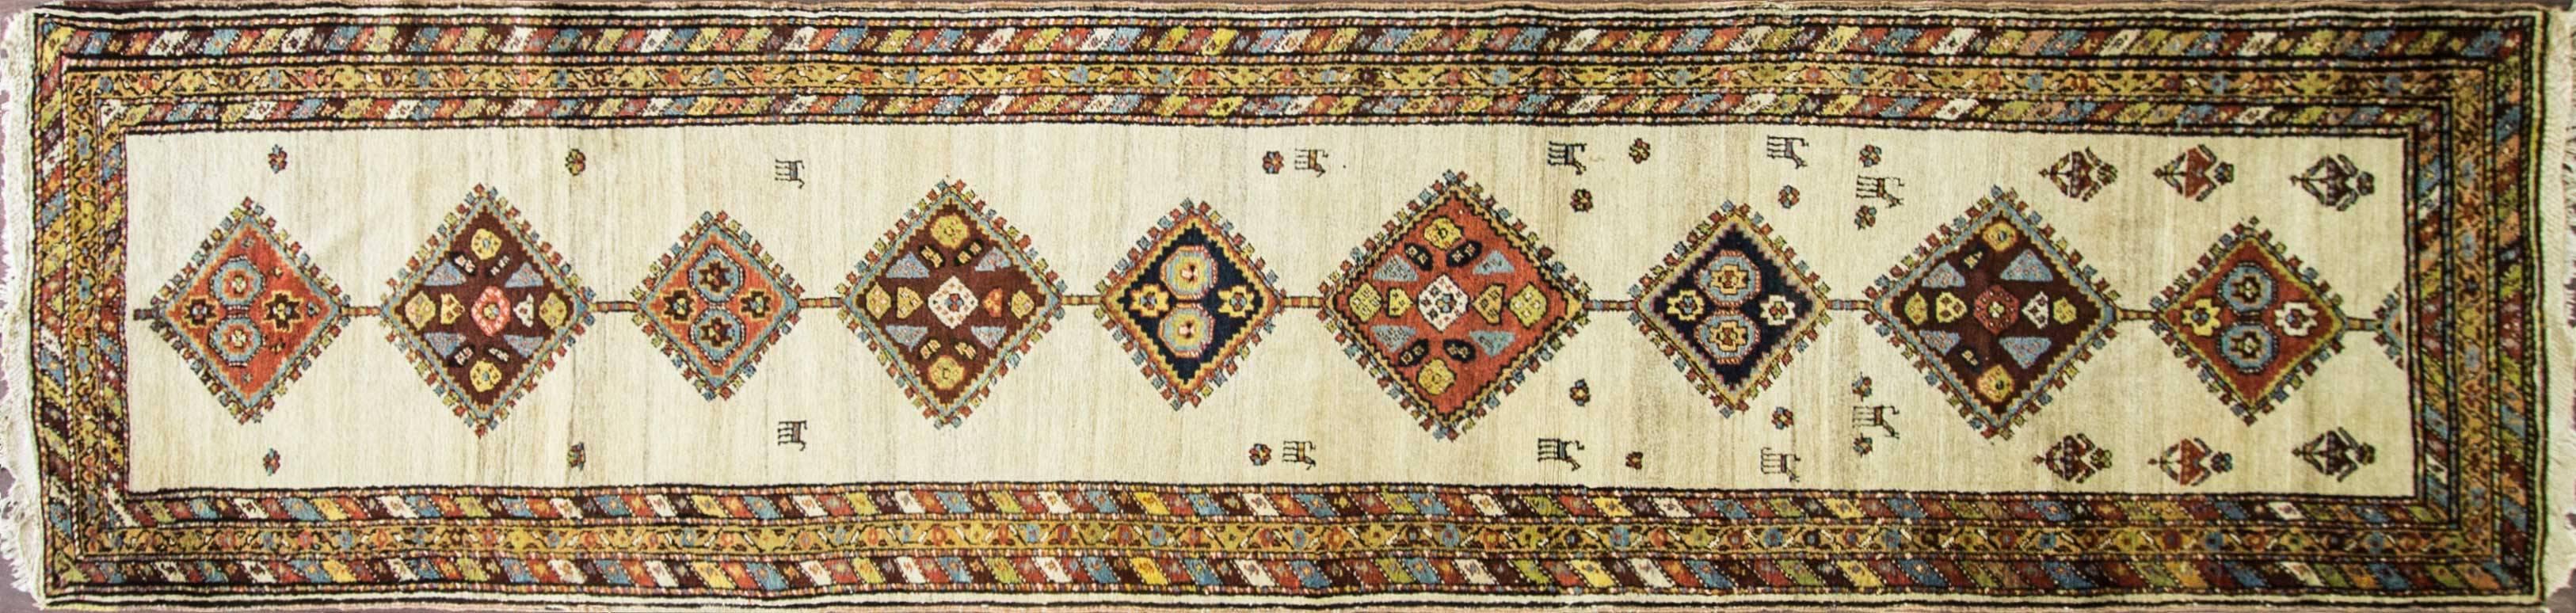 An unusual antique Azerbaijan runner, circa 1920 in perfect condition and a rare color background with high quality lustrous vegetable dyed wool.
This runner made in northwest Persia.